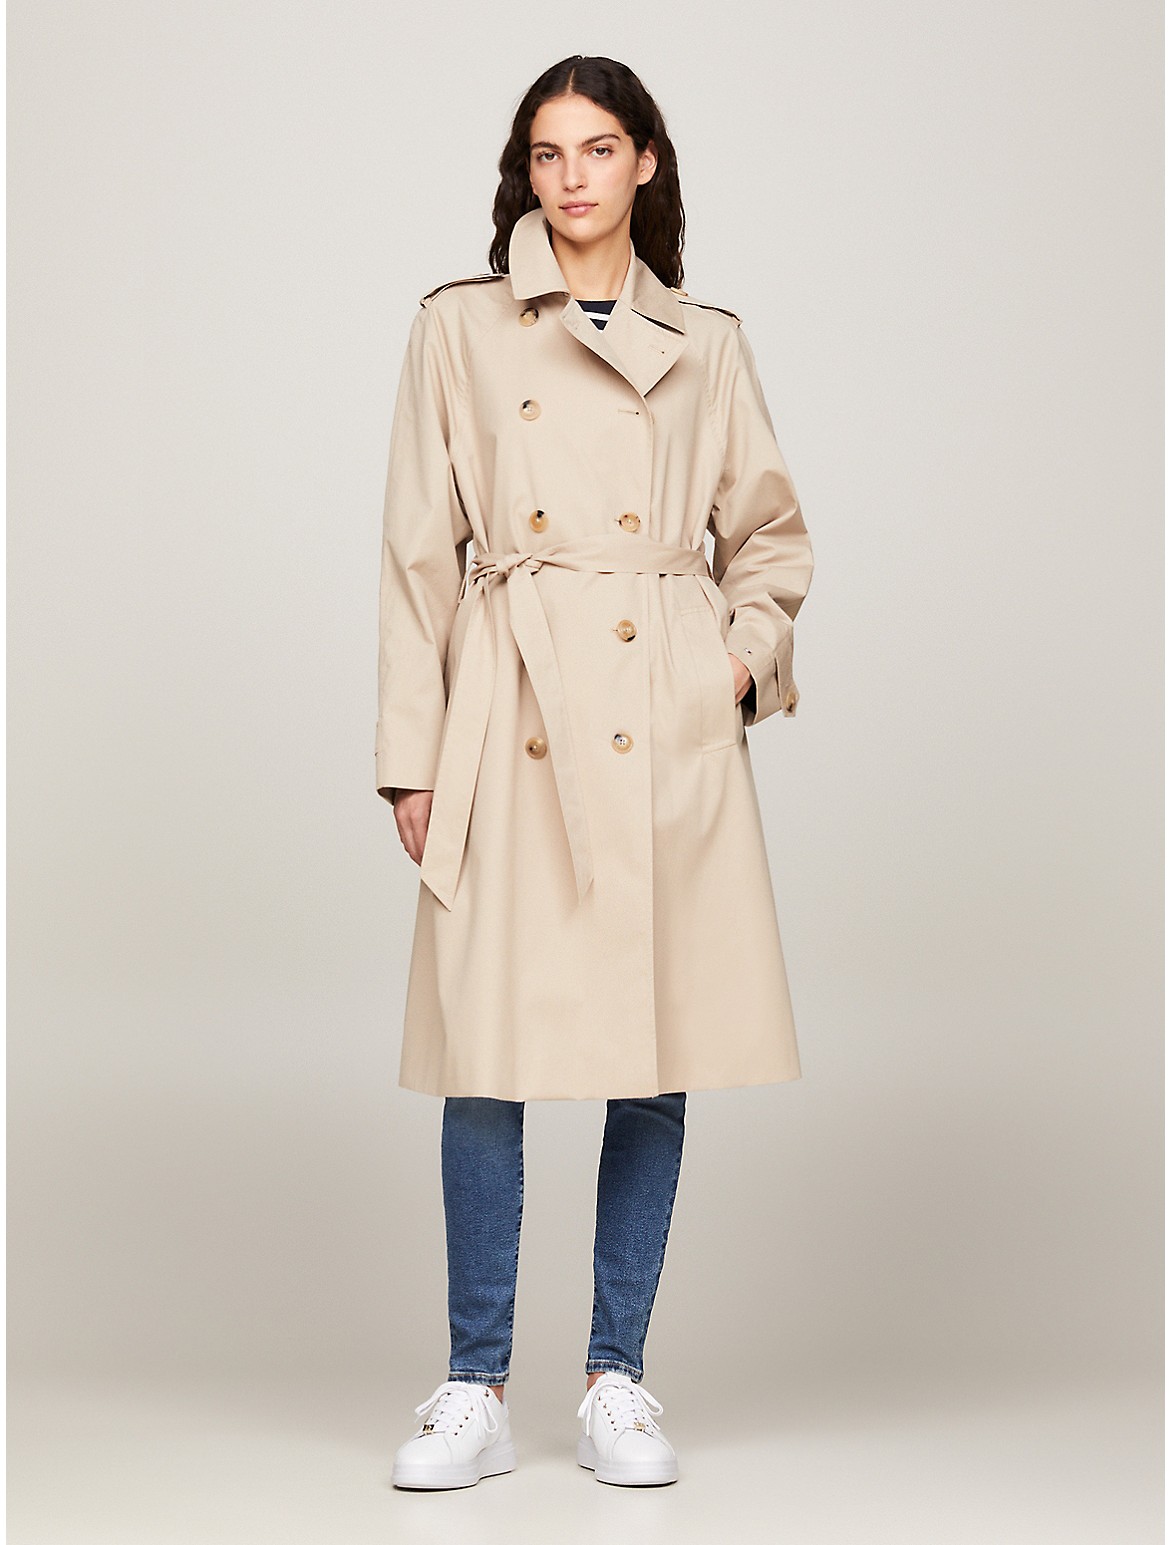 Tommy Hilfiger Women's Cotton Trench Coat